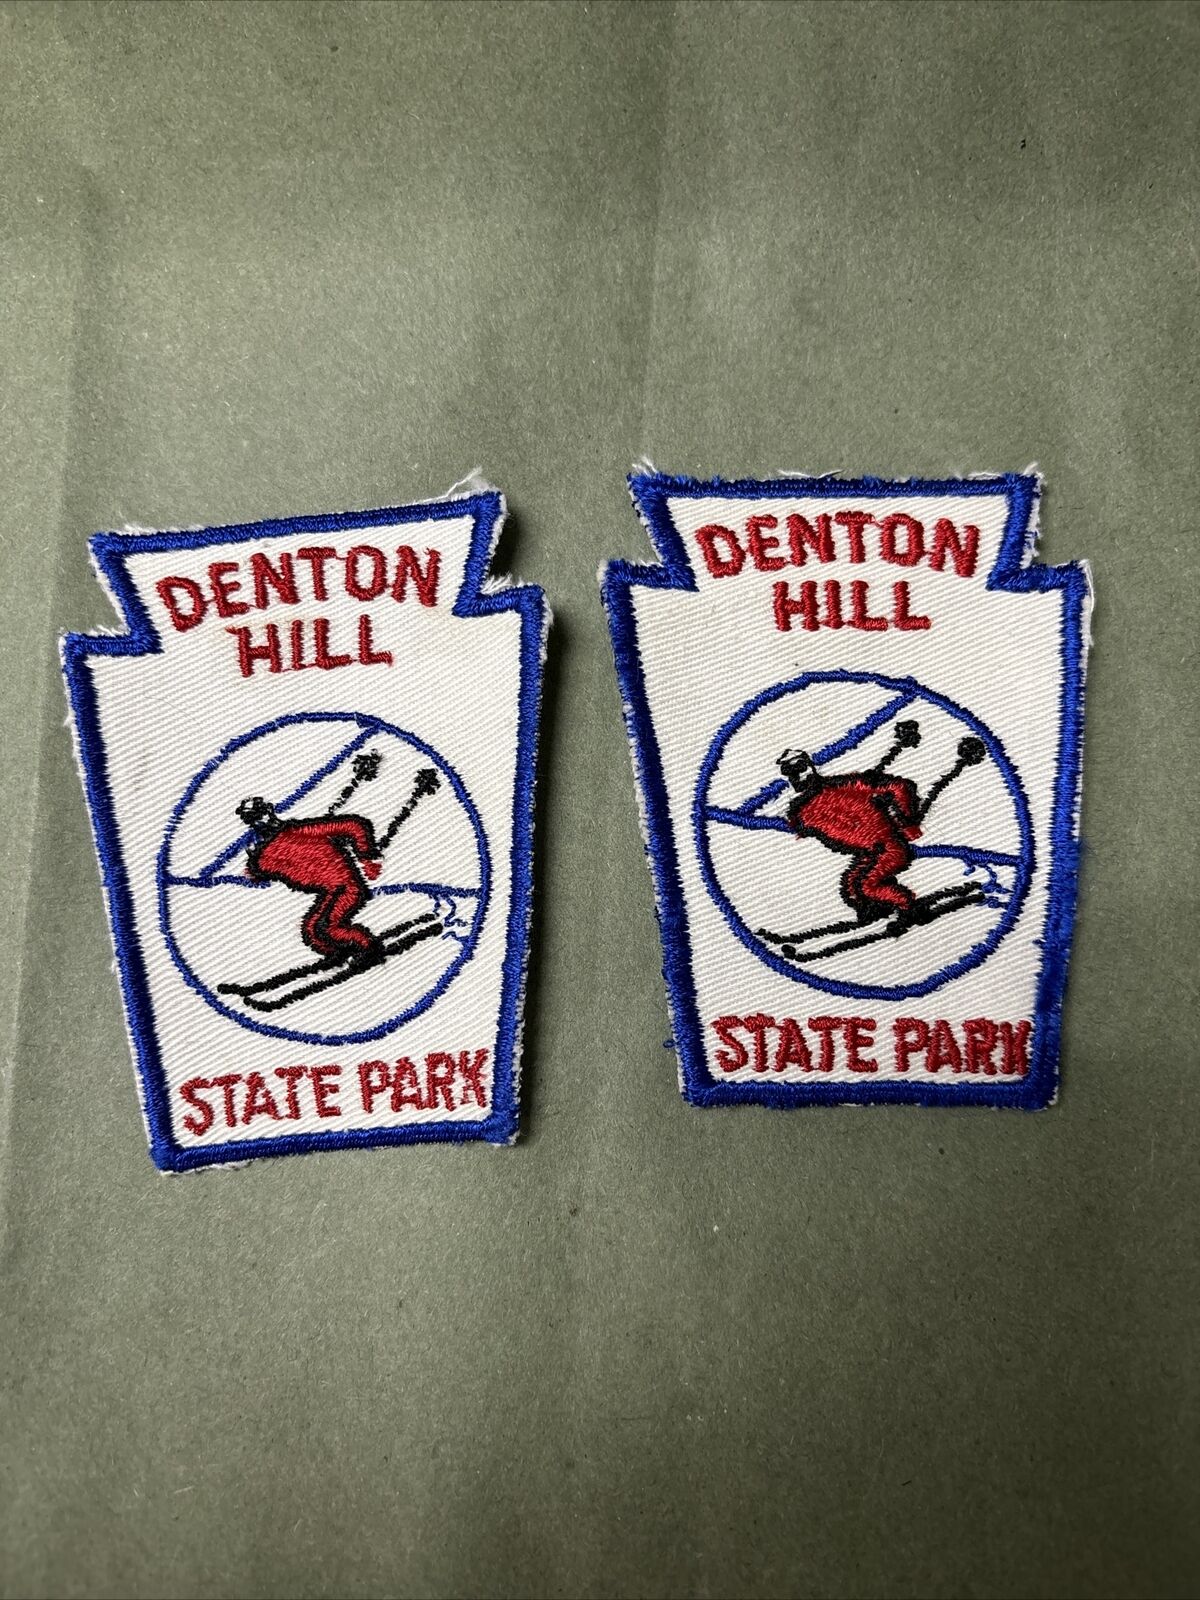 2- RARE “Denton Hill” State Park Ski Resort Potter County PA Embroidered Patches